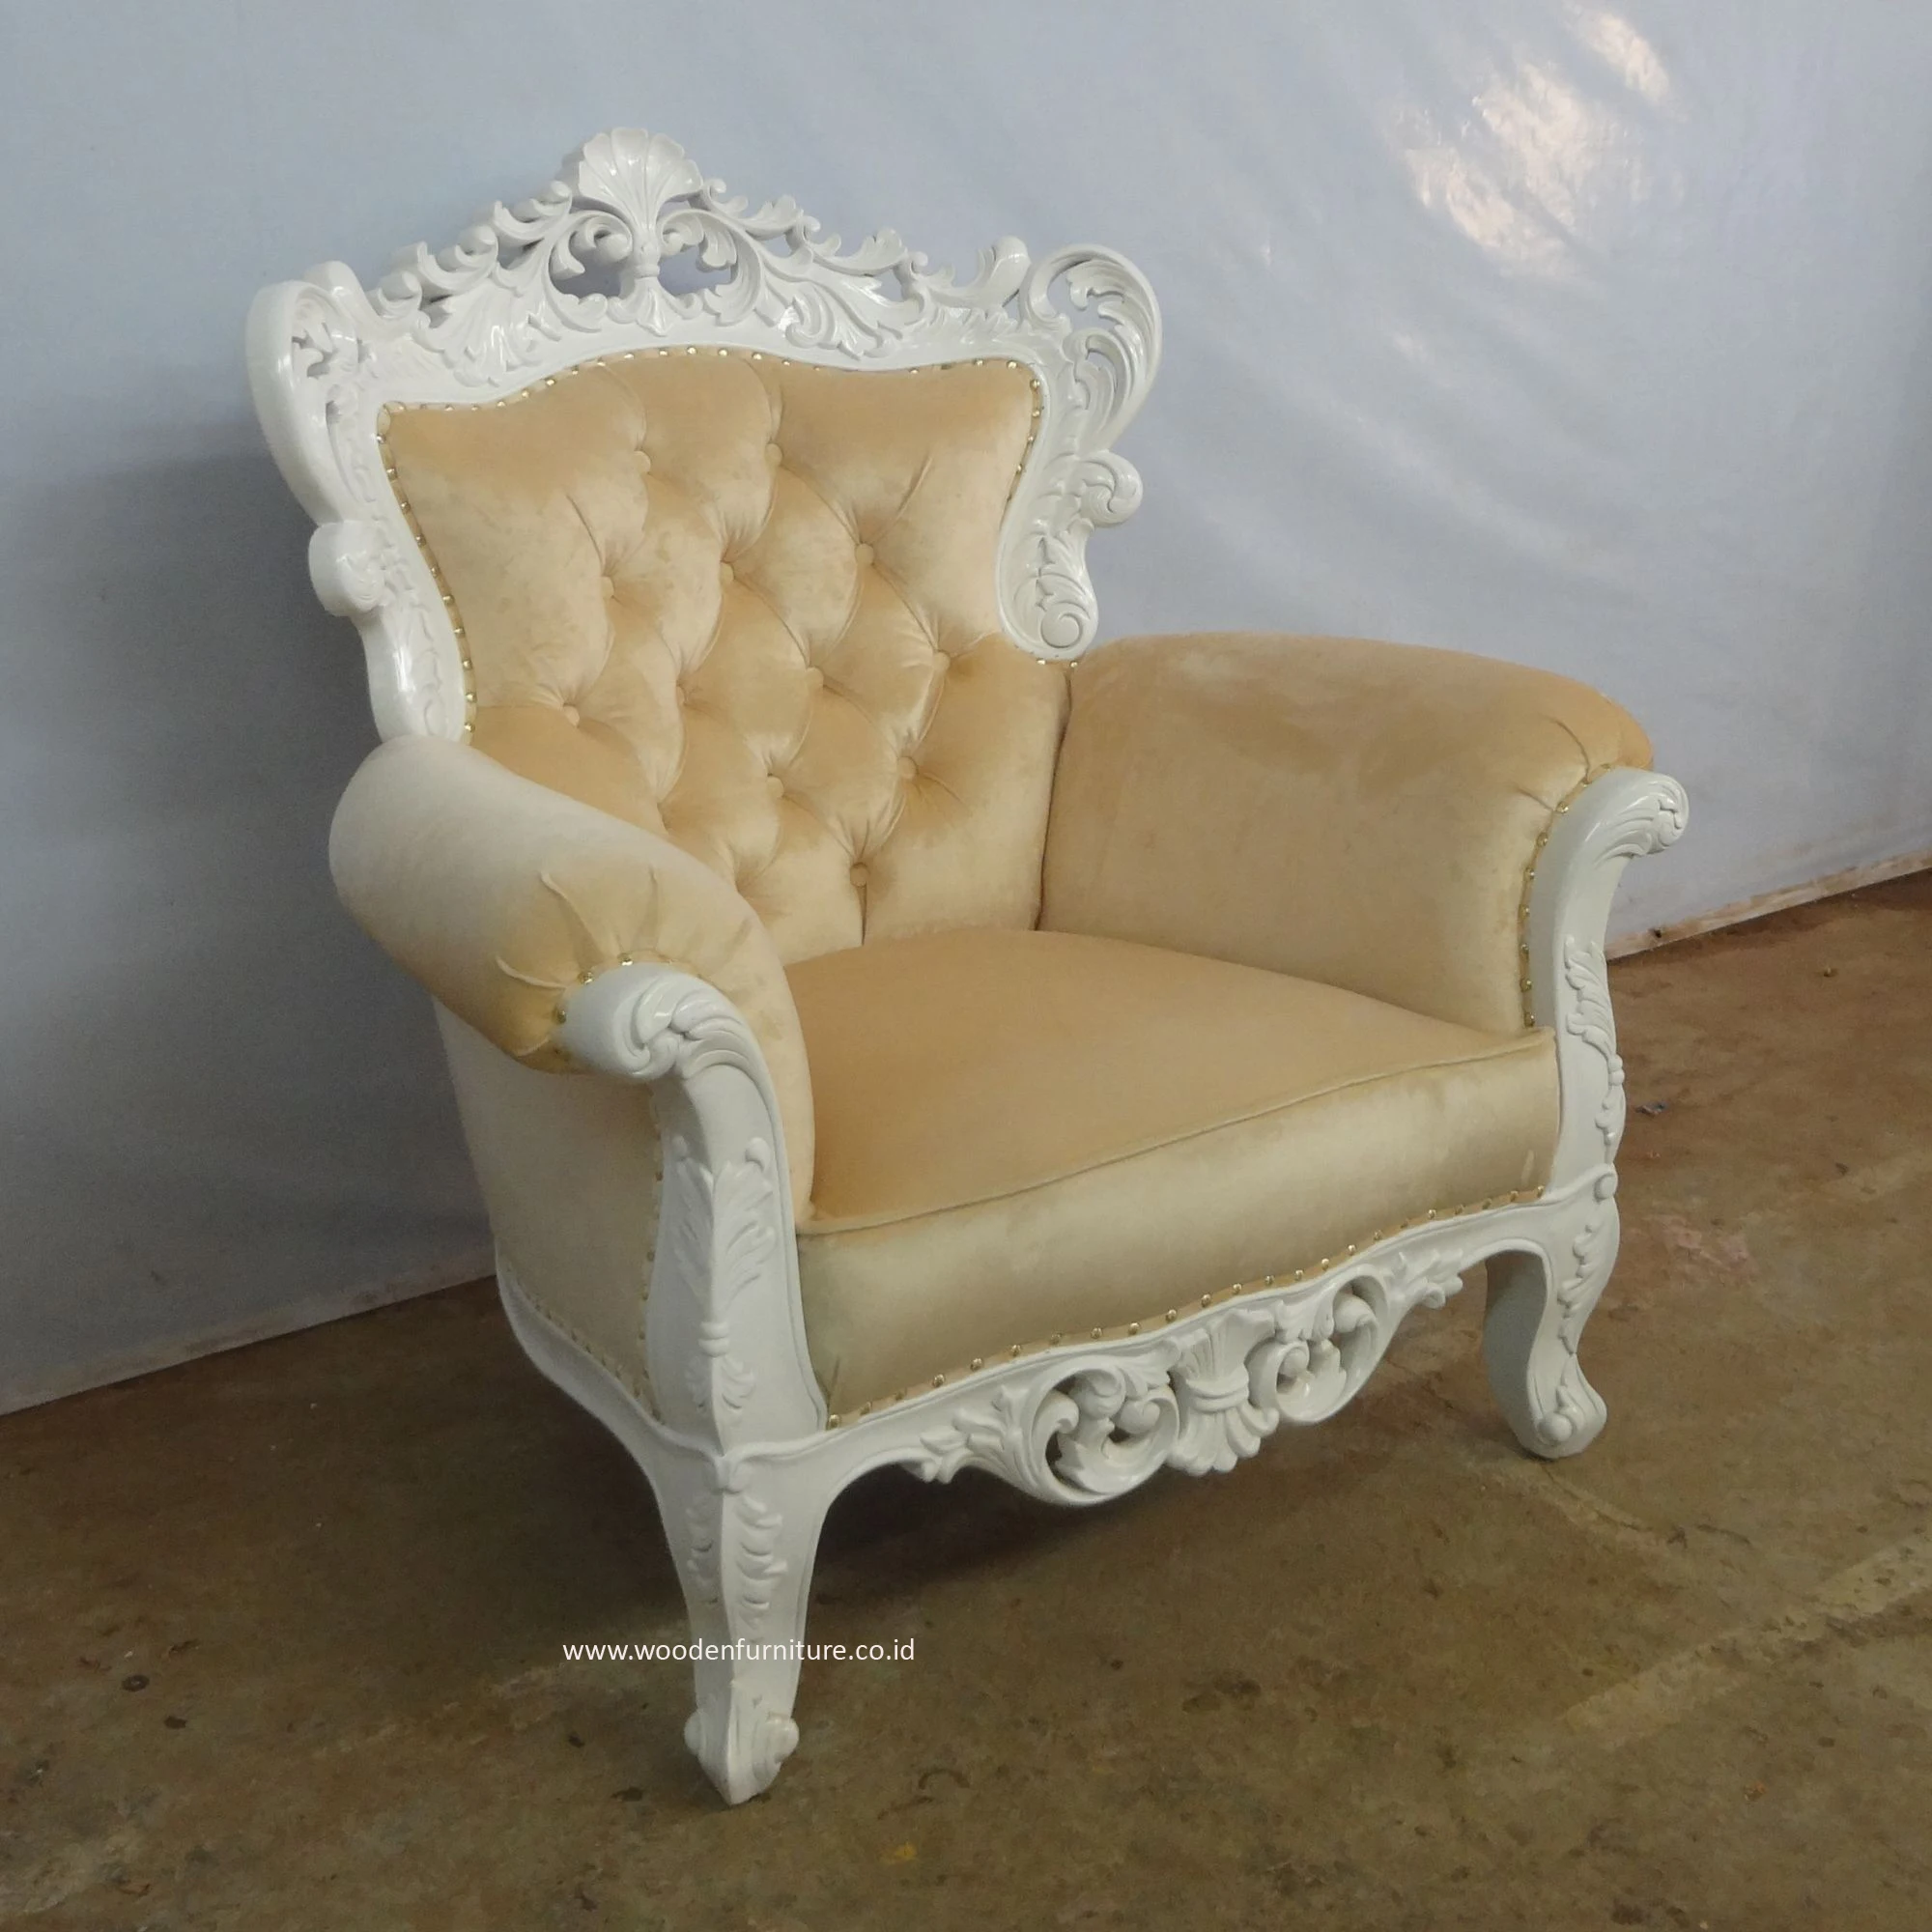 French Style Sofa Antique Chair Vintage European Living Room Furniture Mahogany Painted Chair Antique Repro Home Furniture Buy French Provincial Living Room Furniture